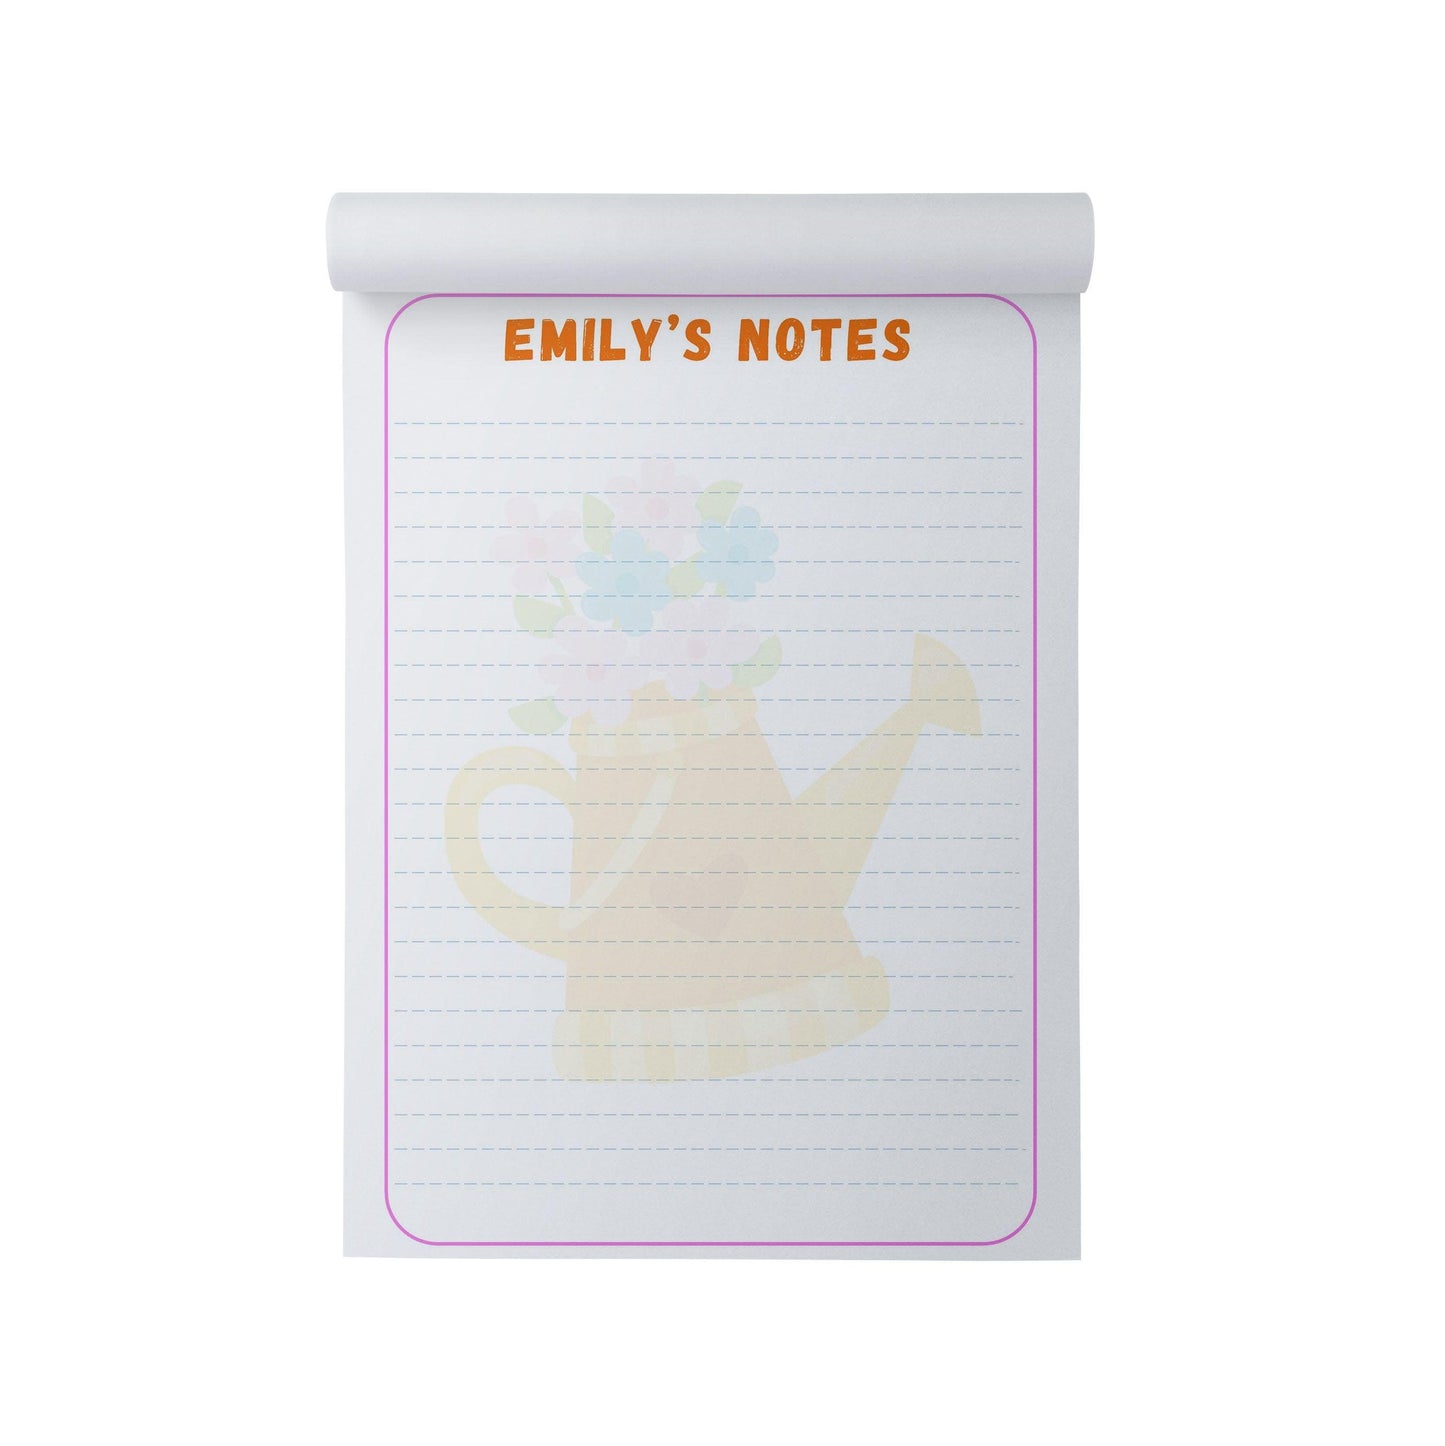  Flowers Personalised Note Pad, A5 With 50 Tear-off Sheets by PMPRINTED 